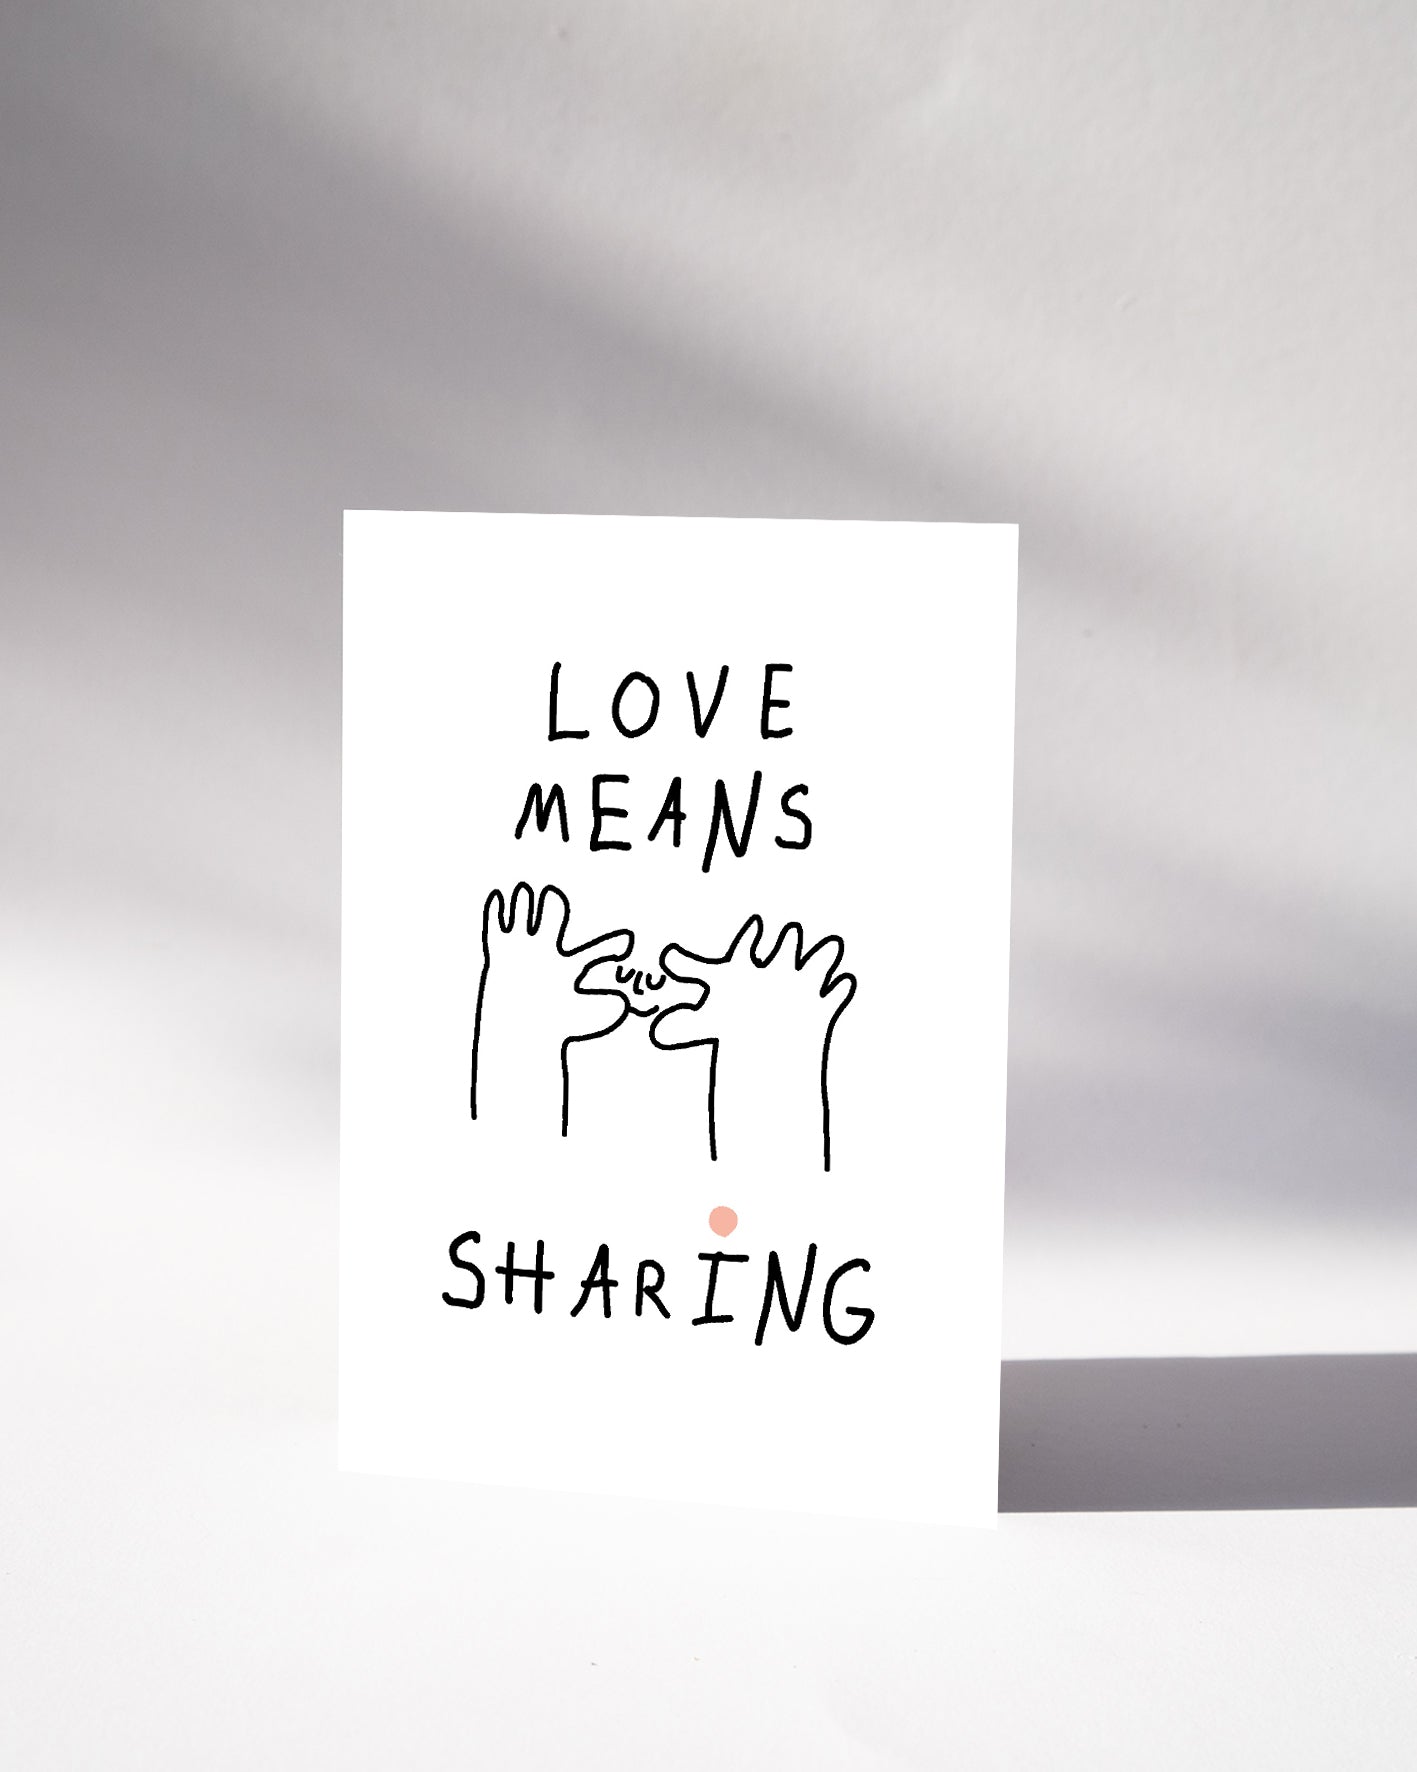 Postkarte — LOVE MEANS SHARING